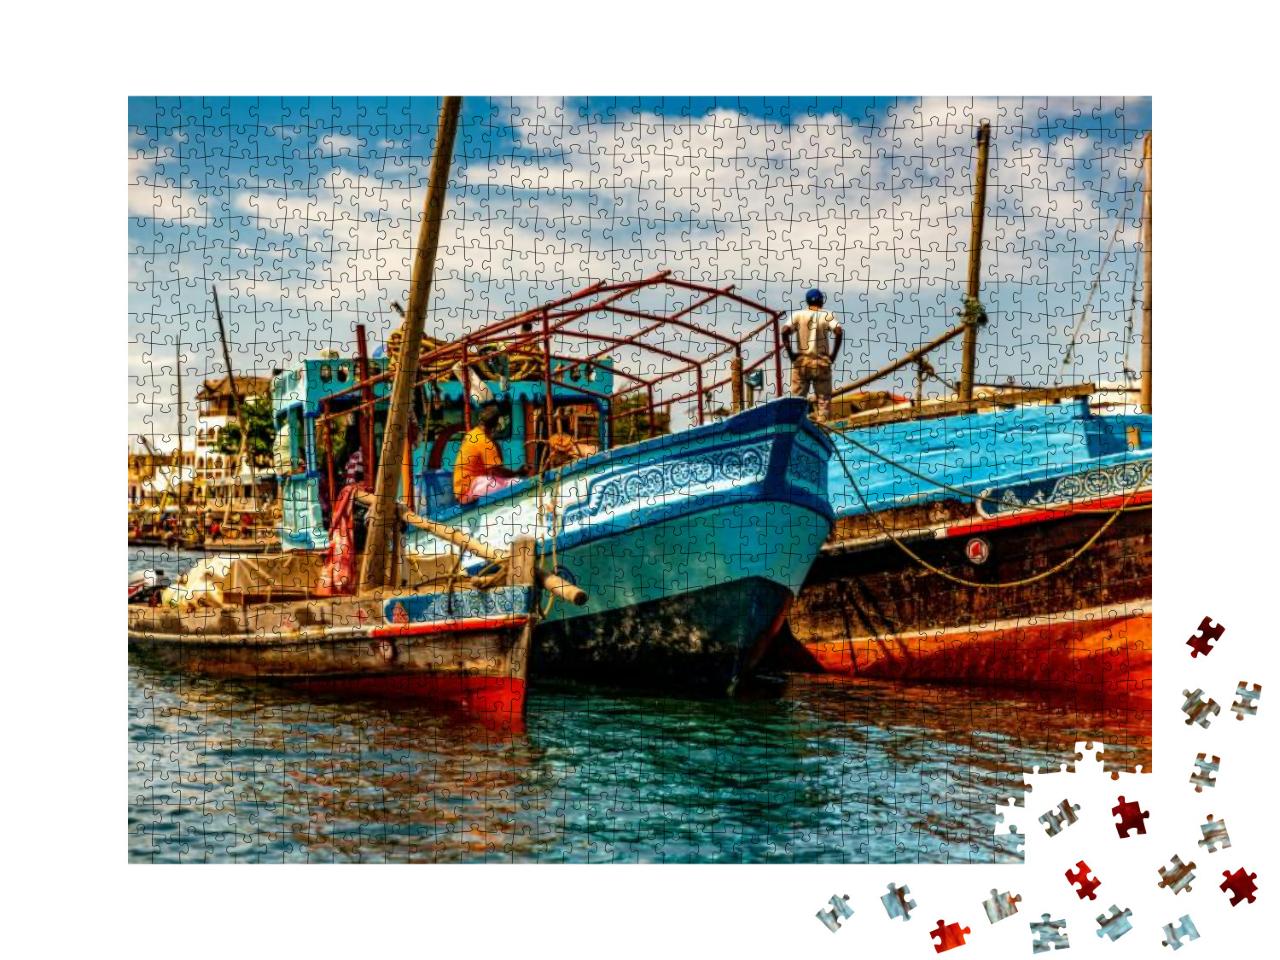 Colorful, Old, Wooden Fishing Dhows Moored Alongside the... Jigsaw Puzzle with 1000 pieces